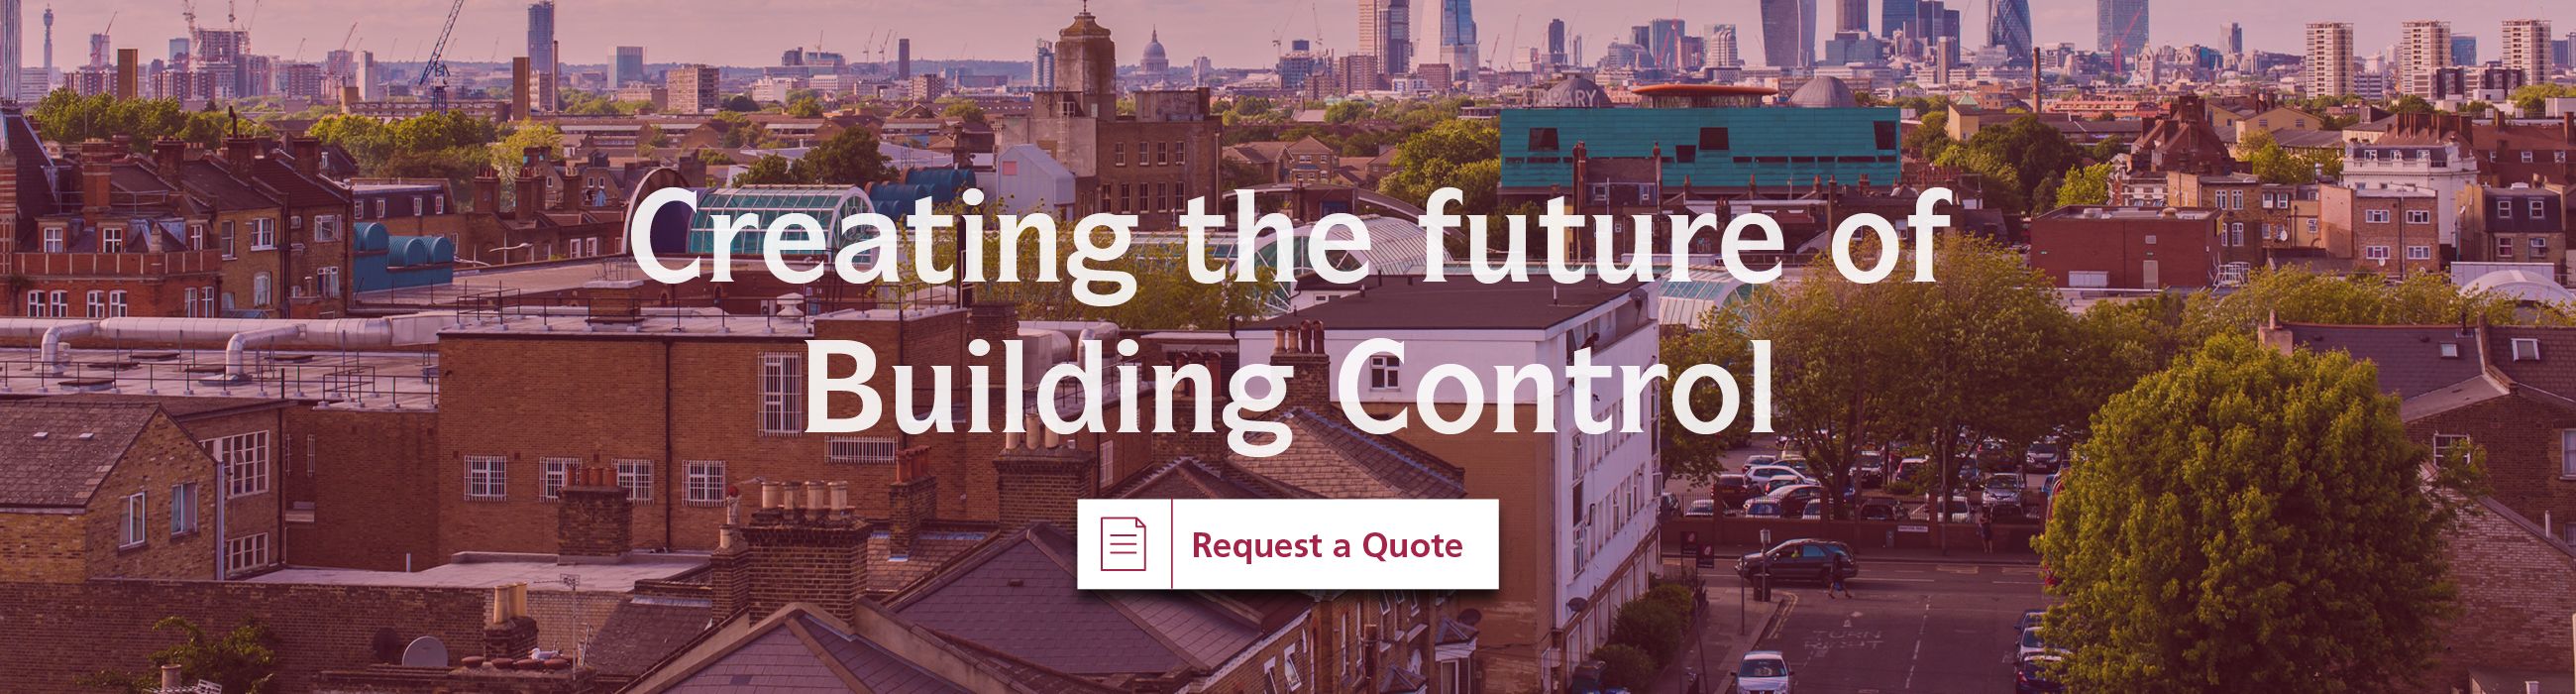 Stroma Building Control Project Application